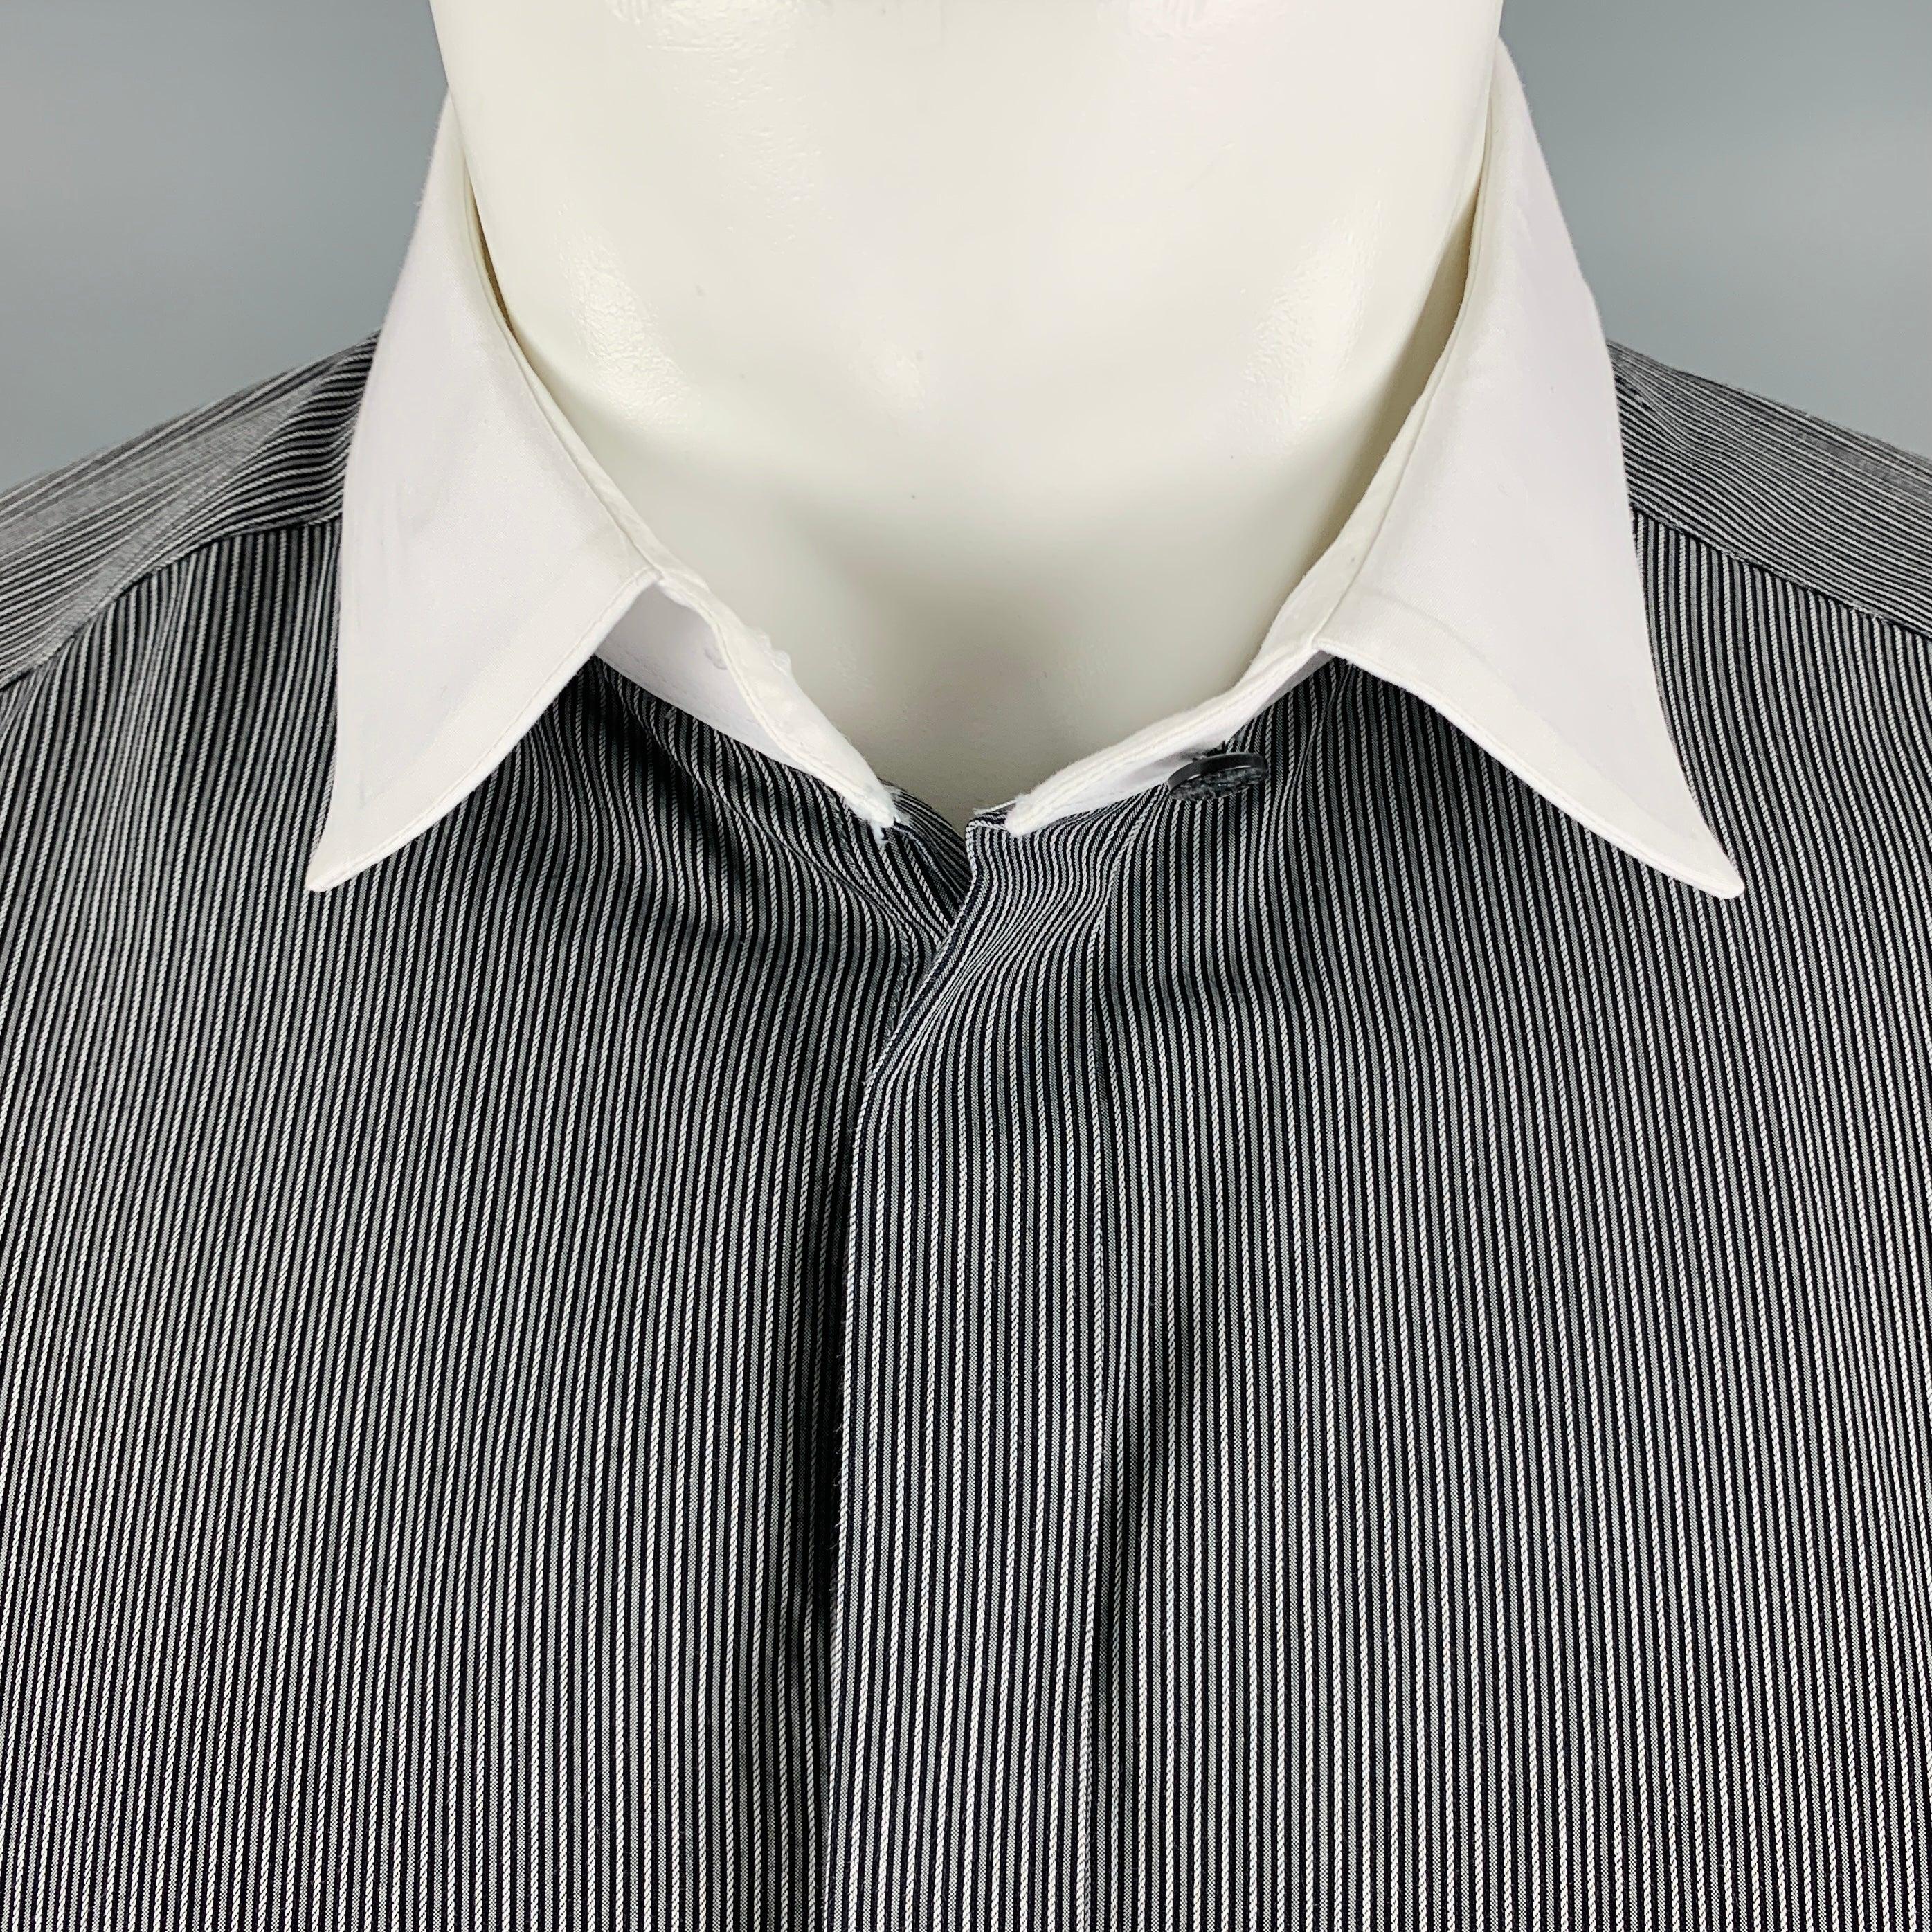 DOLCE & GABBANA long sleeve shirt in a black and white cotton fabric featuring pinstripe pattern, contrast white collar, and hidden button closure. Made in Italy.Excellent Pre-Owned Condition. 

Marked:   16.5/42 

Measurements: 
 
Shoulder: 17